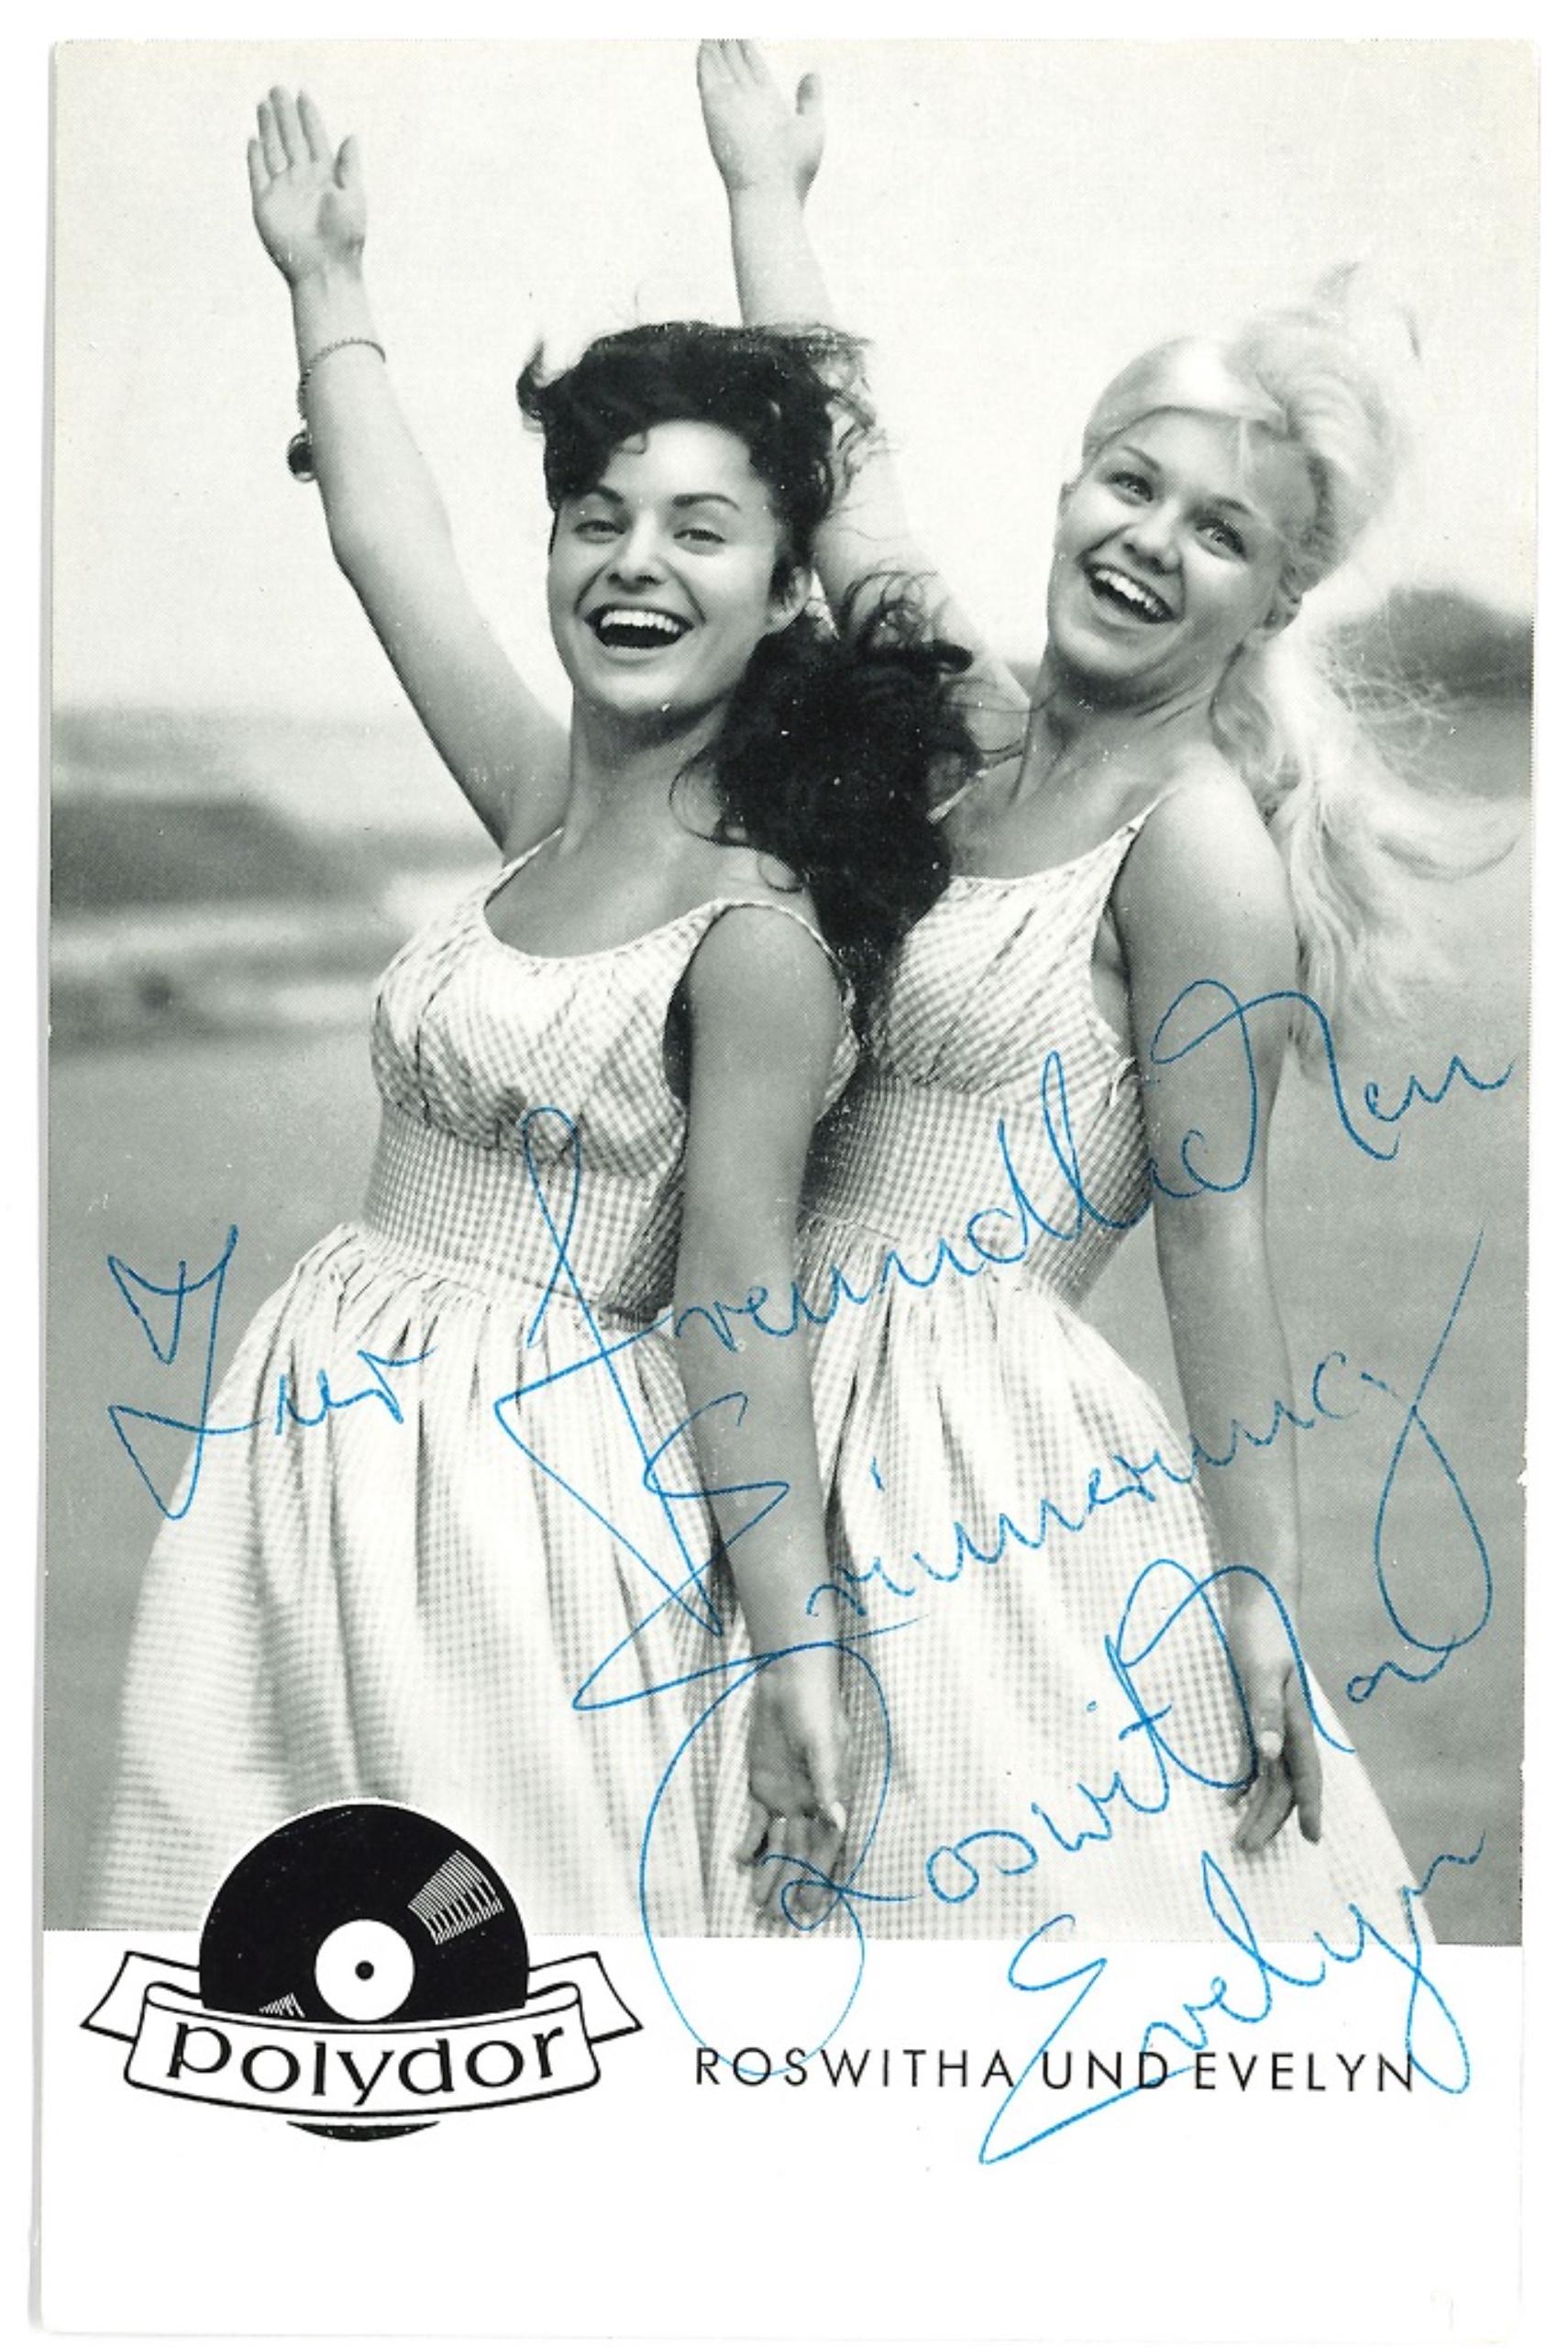 Unknown Portrait Photograph - Roswitha and Evelyn - Original Autographed b/w Postcard - 1950s